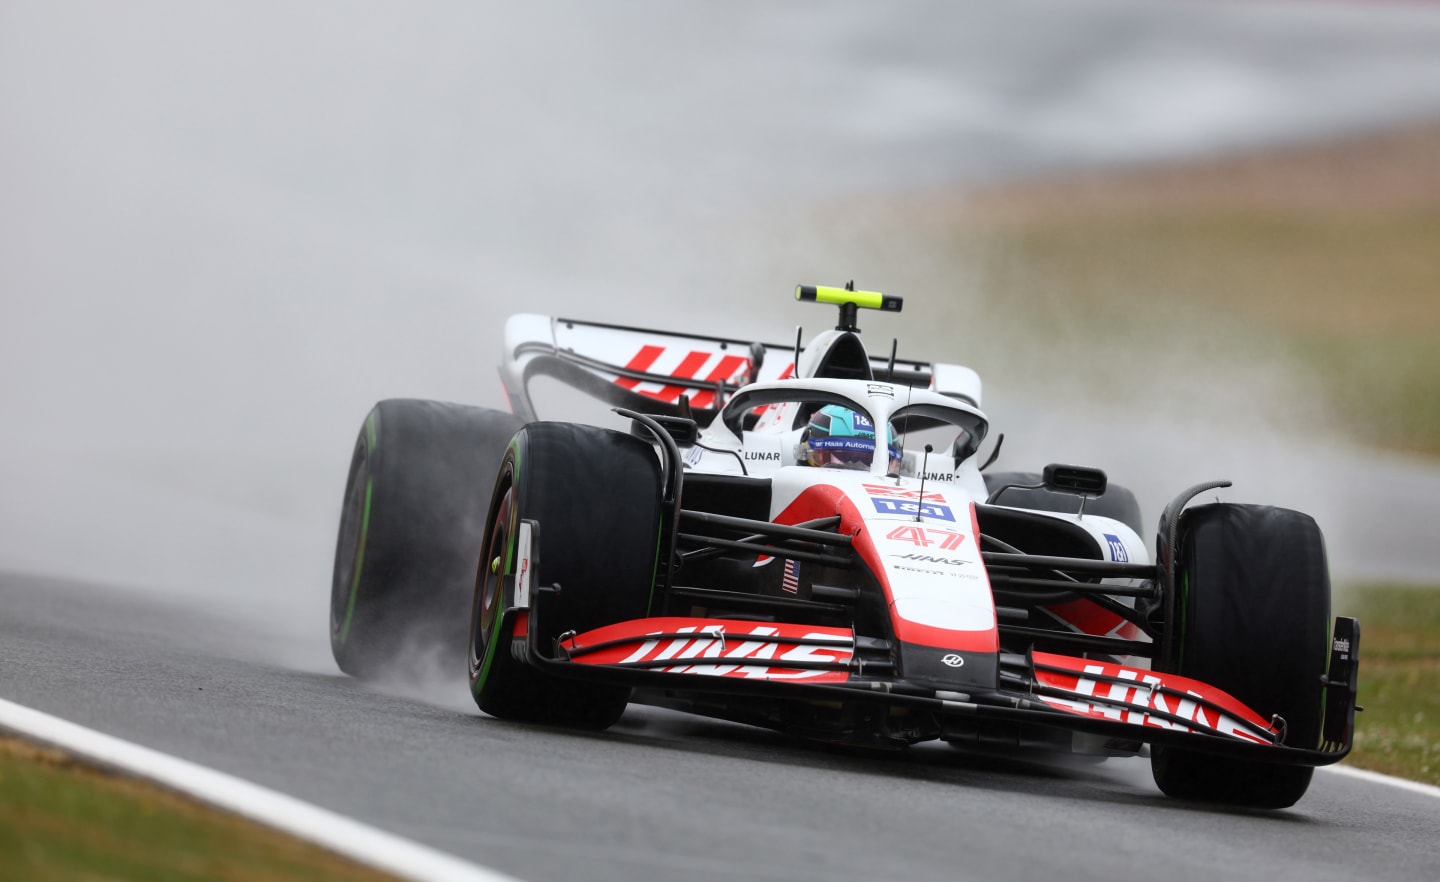 NORTHAMPTON, ENGLAND - JULY 02: Mick Schumacher of Germany driving the (47) Haas F1 VF-22 Ferrari on track during qualifying ahead of the F1 Grand Prix of Great Britain at Silverstone on July 02, 2022 in Northampton, England. (Photo by Clive Rose/Getty Images)